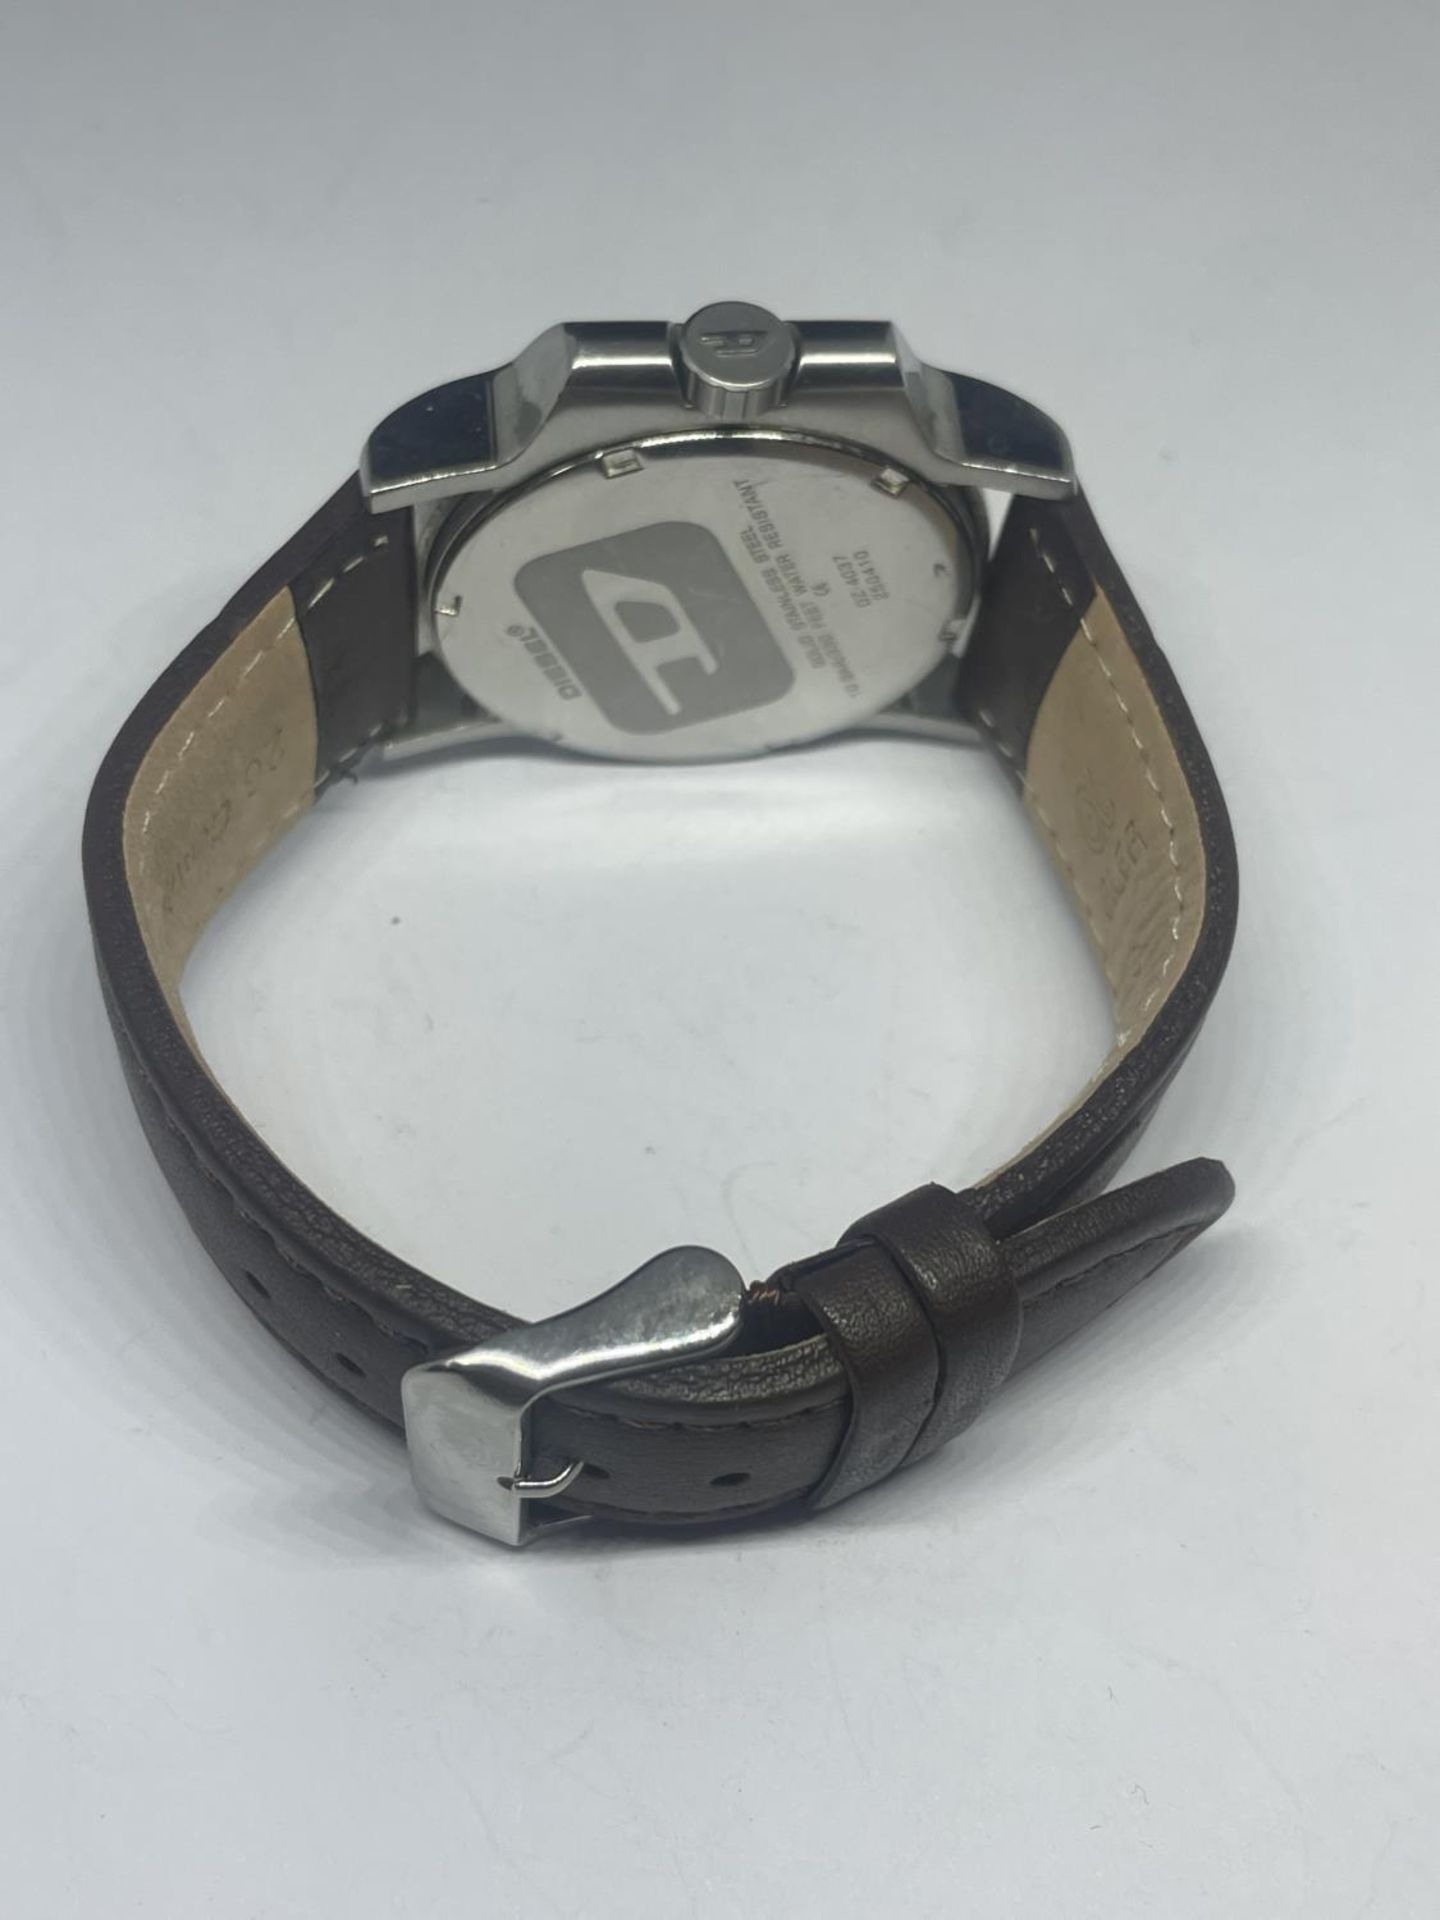 A DIESEL DAY AND DATE WRIST WATCH SEEN WORKING BUT NO WARRANTY - Image 3 of 3